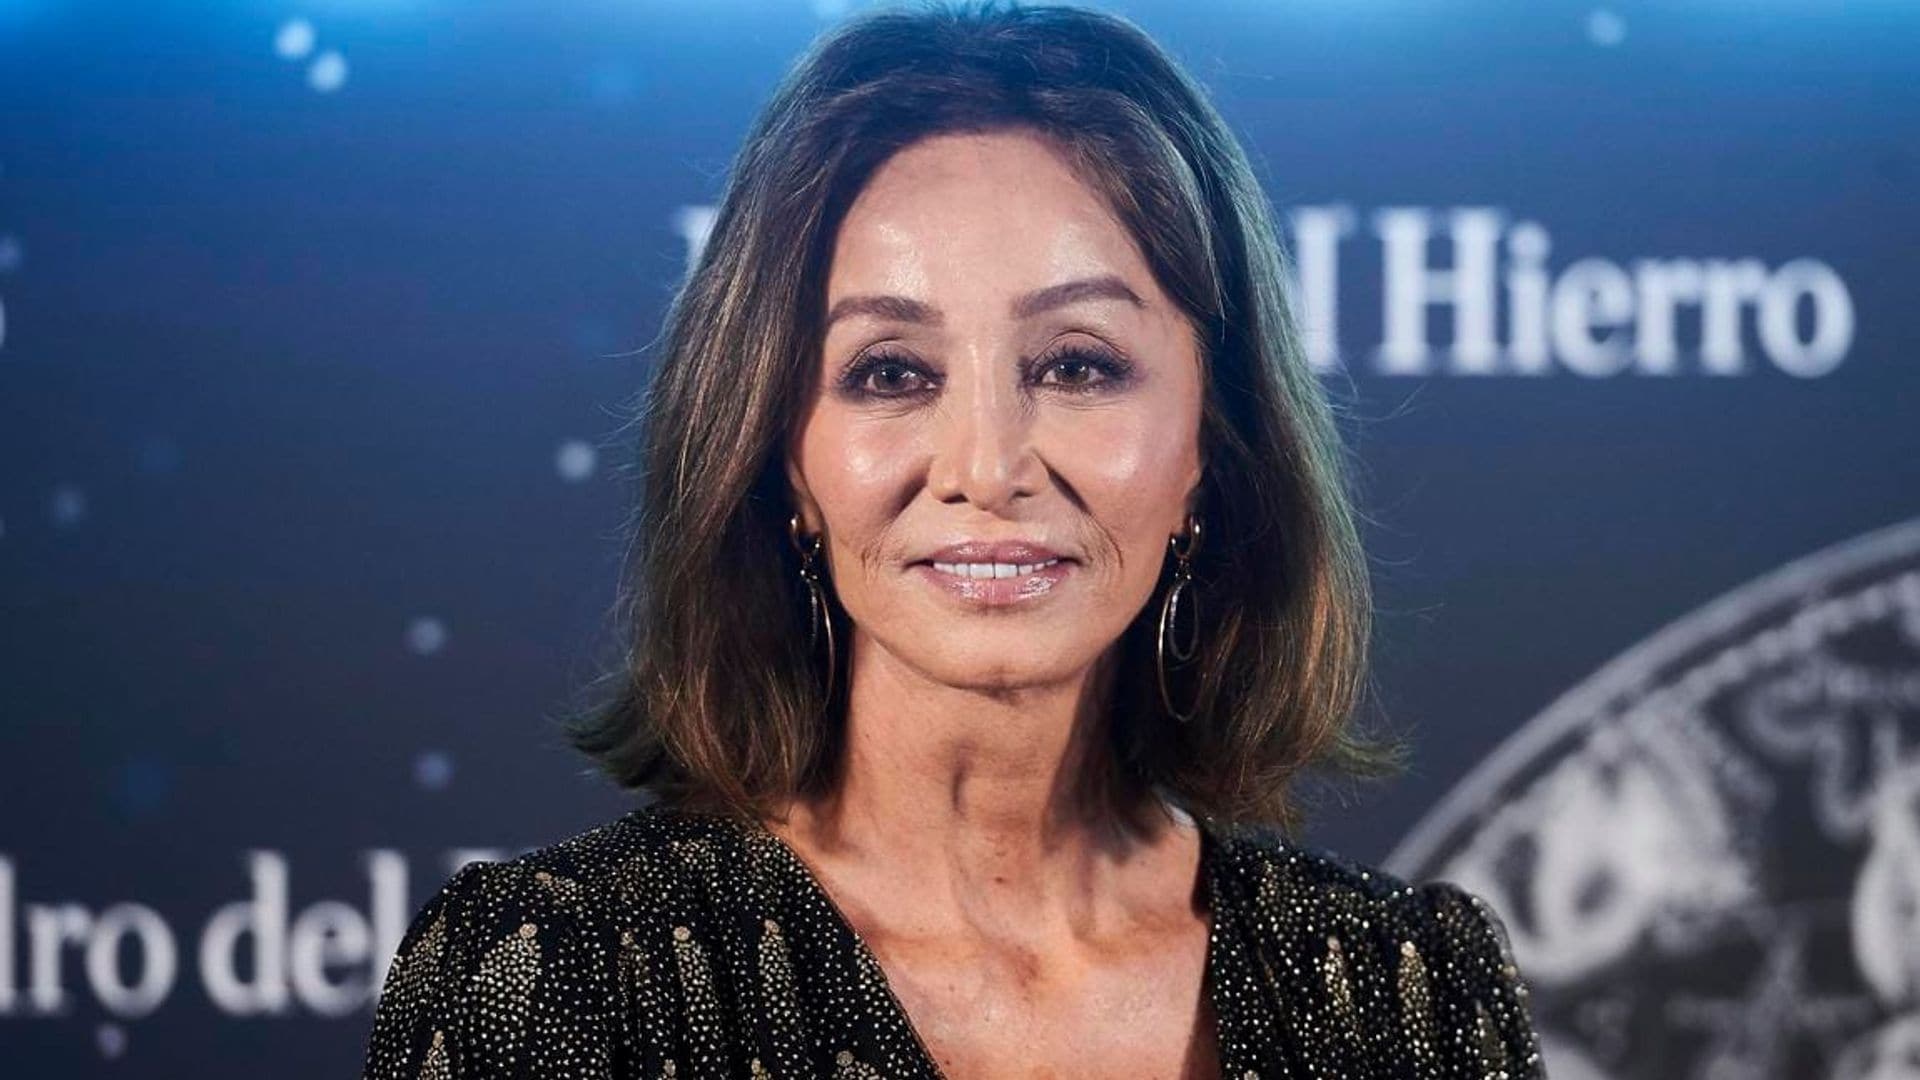 Enrique Iglesias’ mom Isabel Preysler gives update about new baby and reveals who she looks like